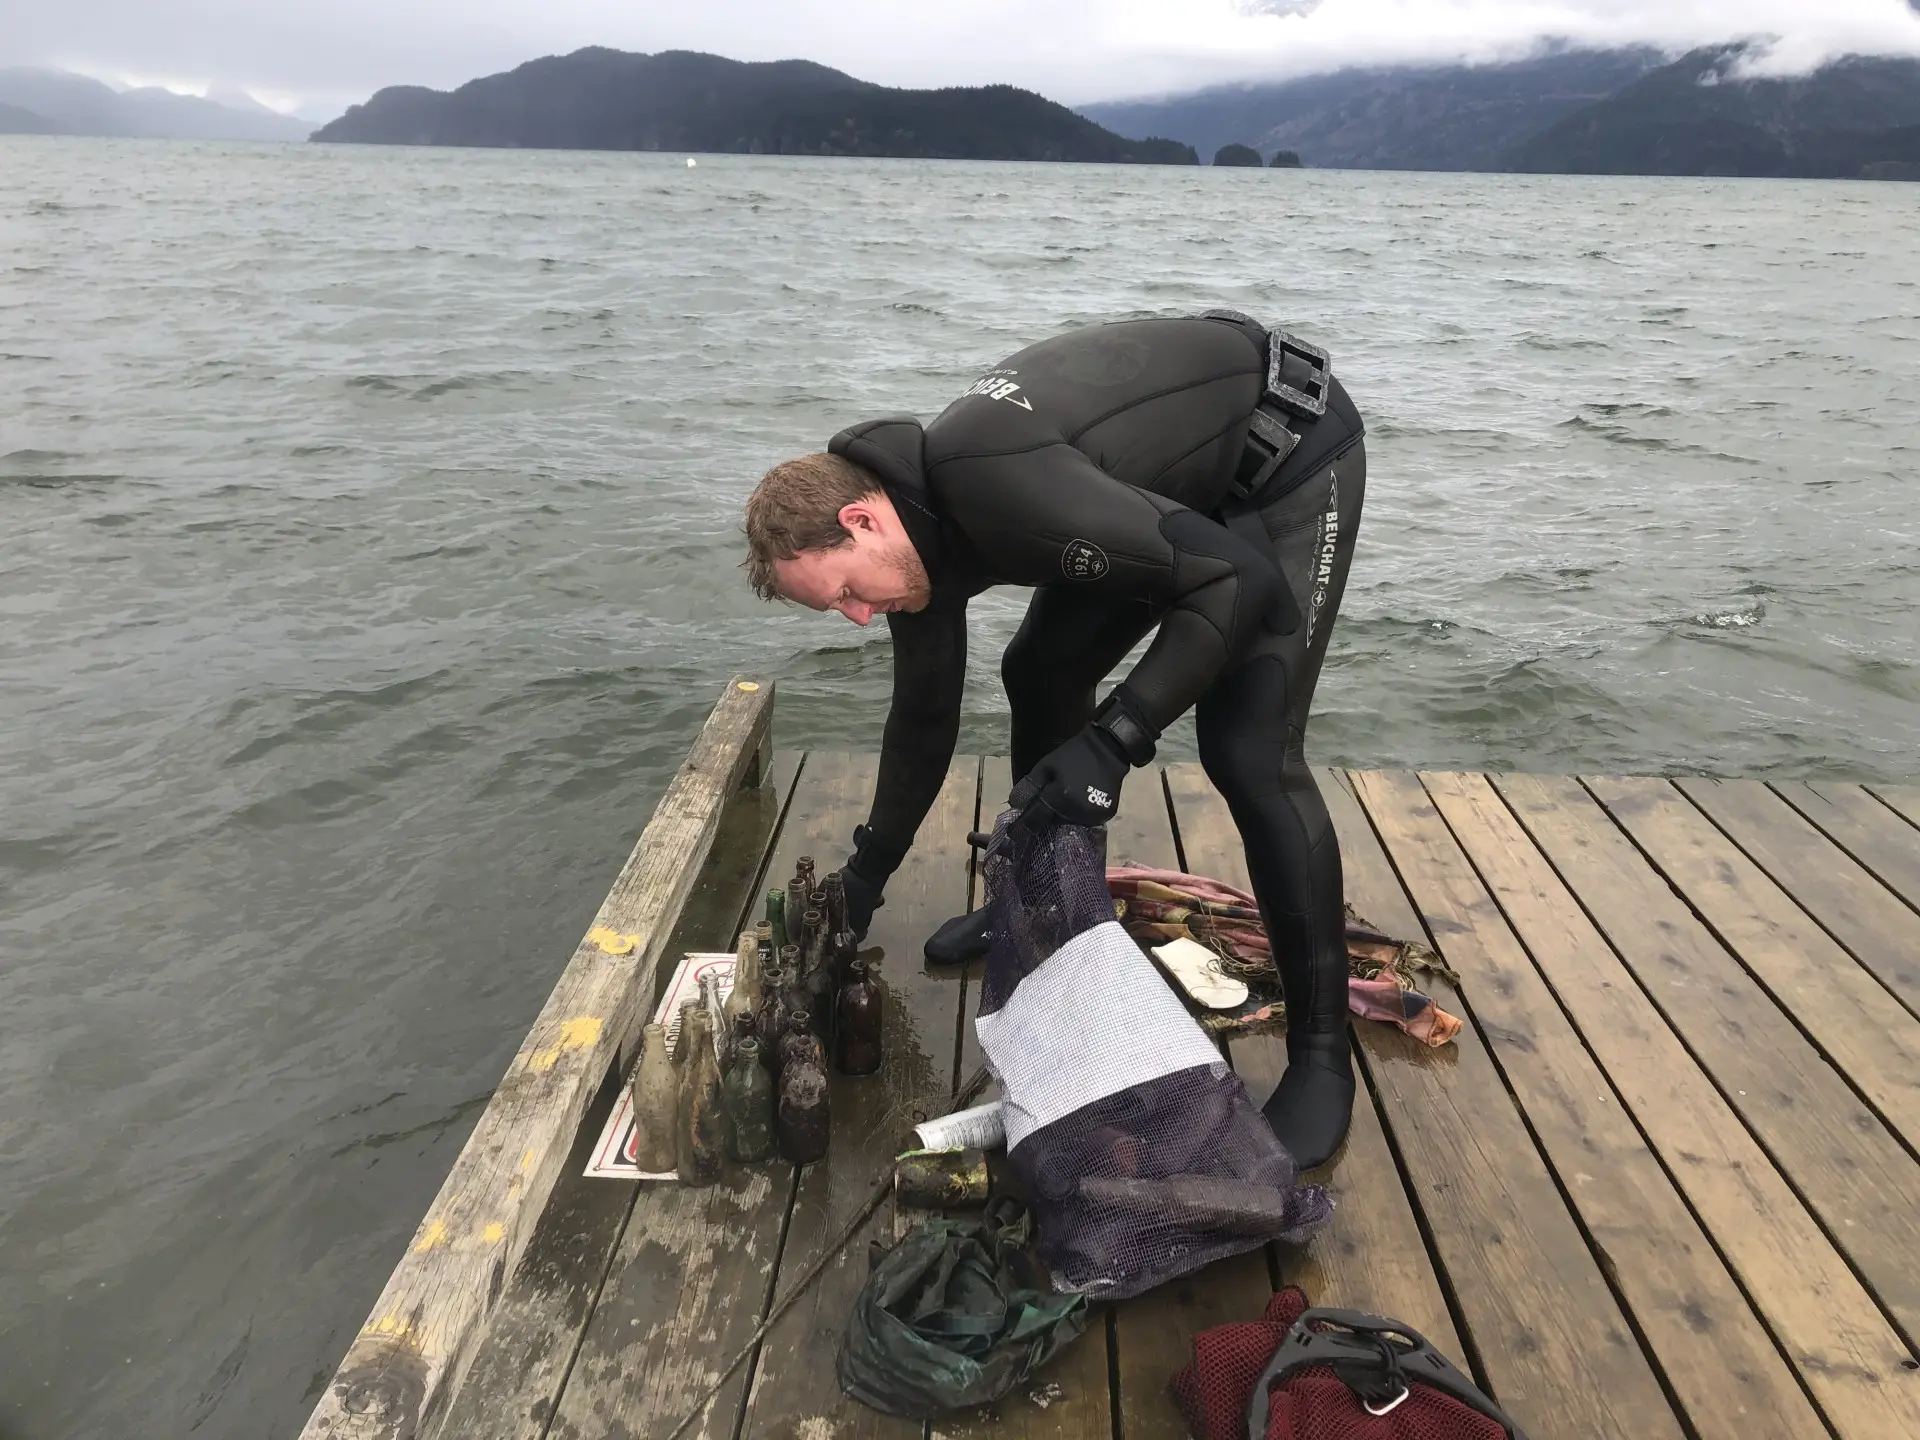 Diver removes tires, iPhones, and over 1,000 lbs of trash from B.C. lake